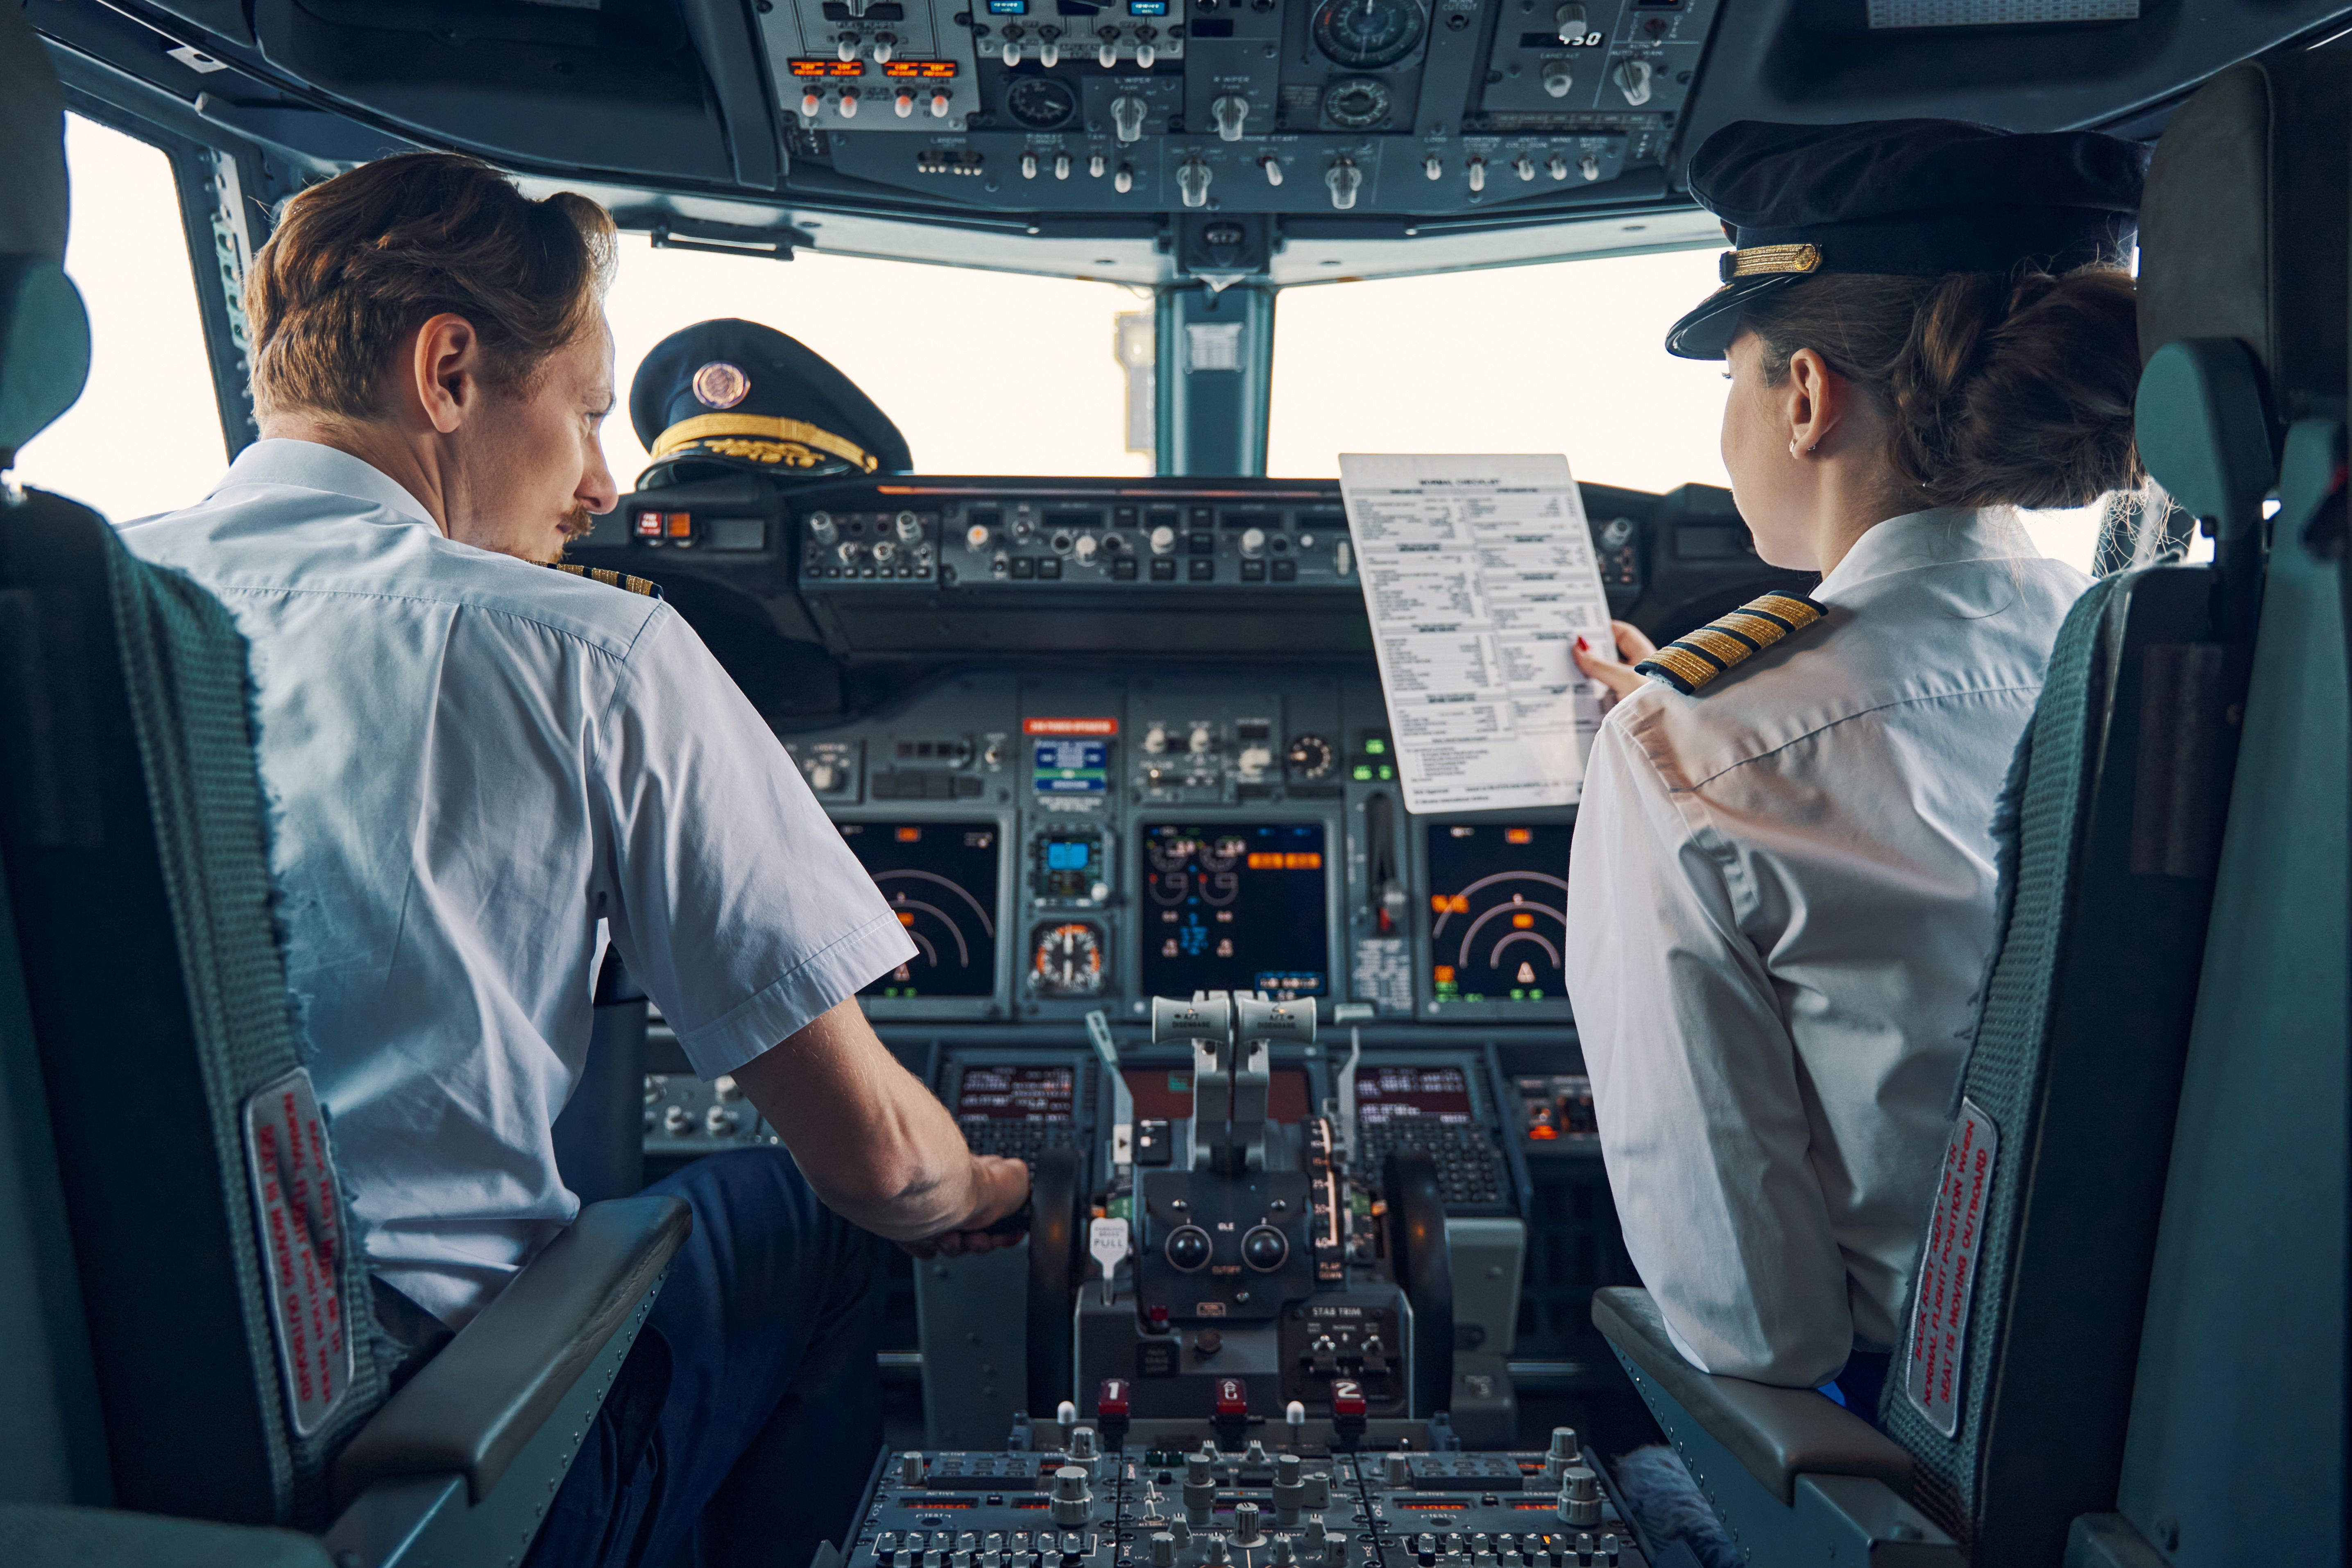 Two Pilots working in the cockpit.